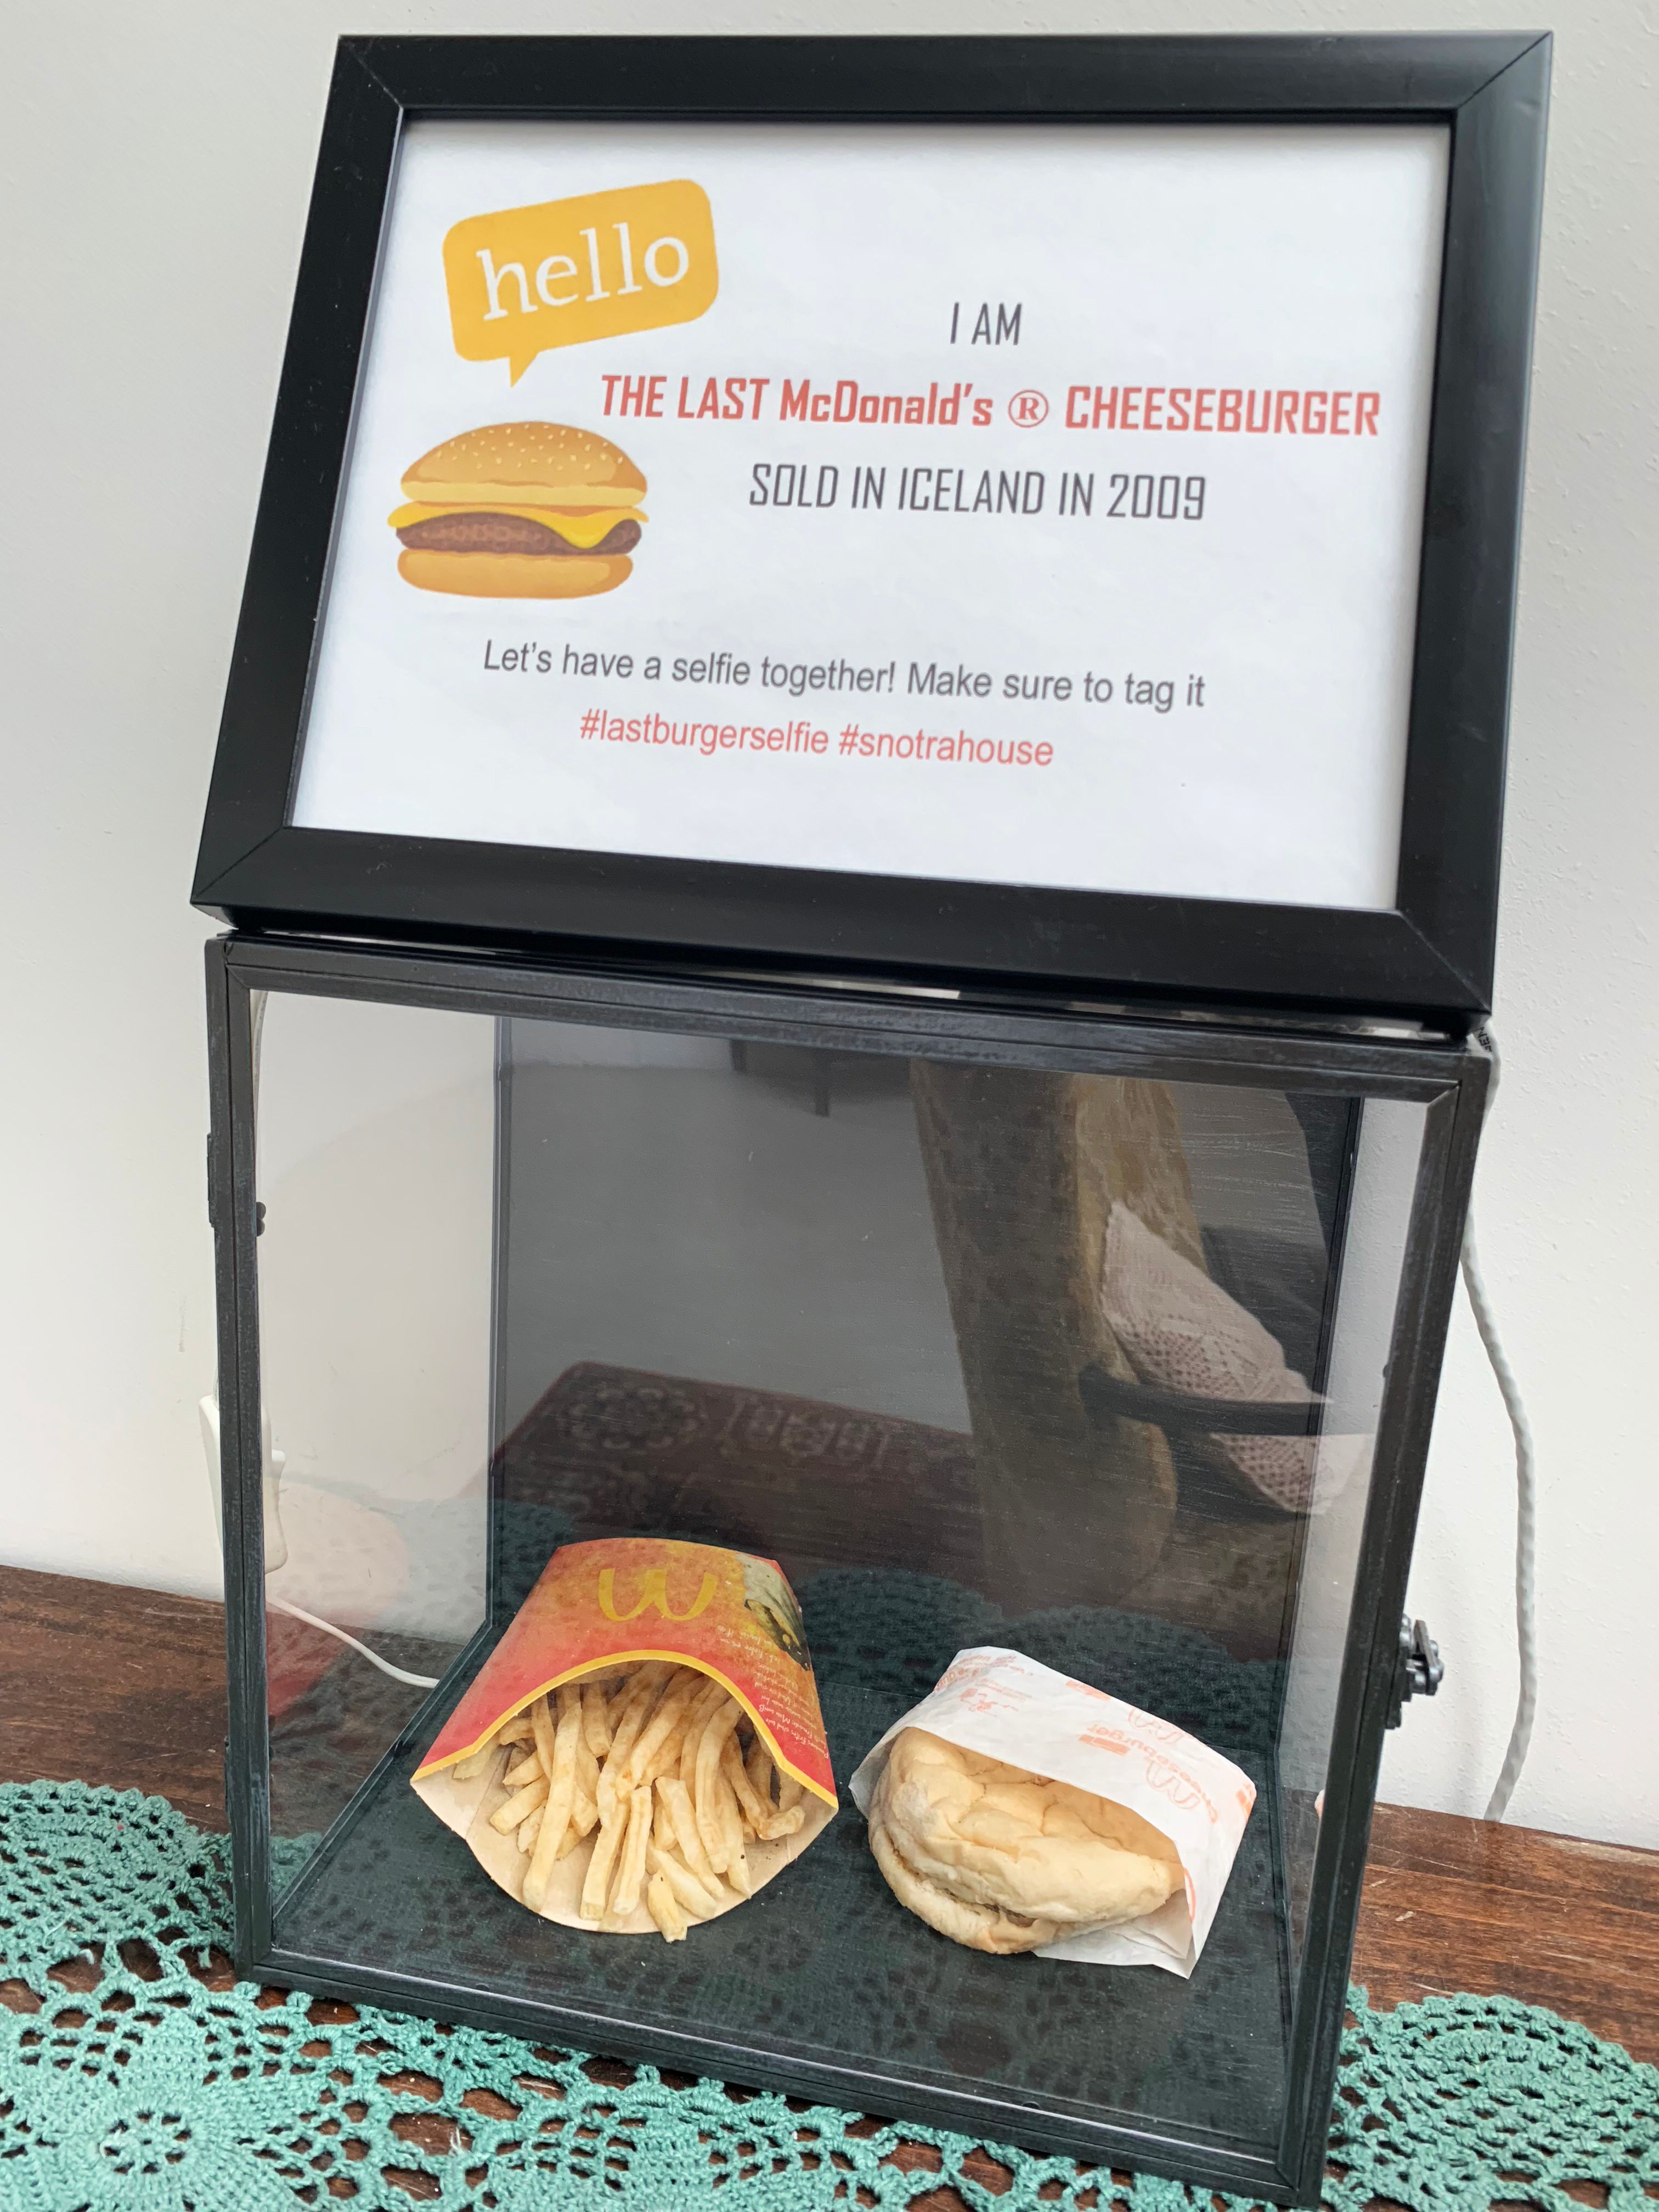 A regular fries pack and mcdonald's burger in a glass box in an Iceland's museum